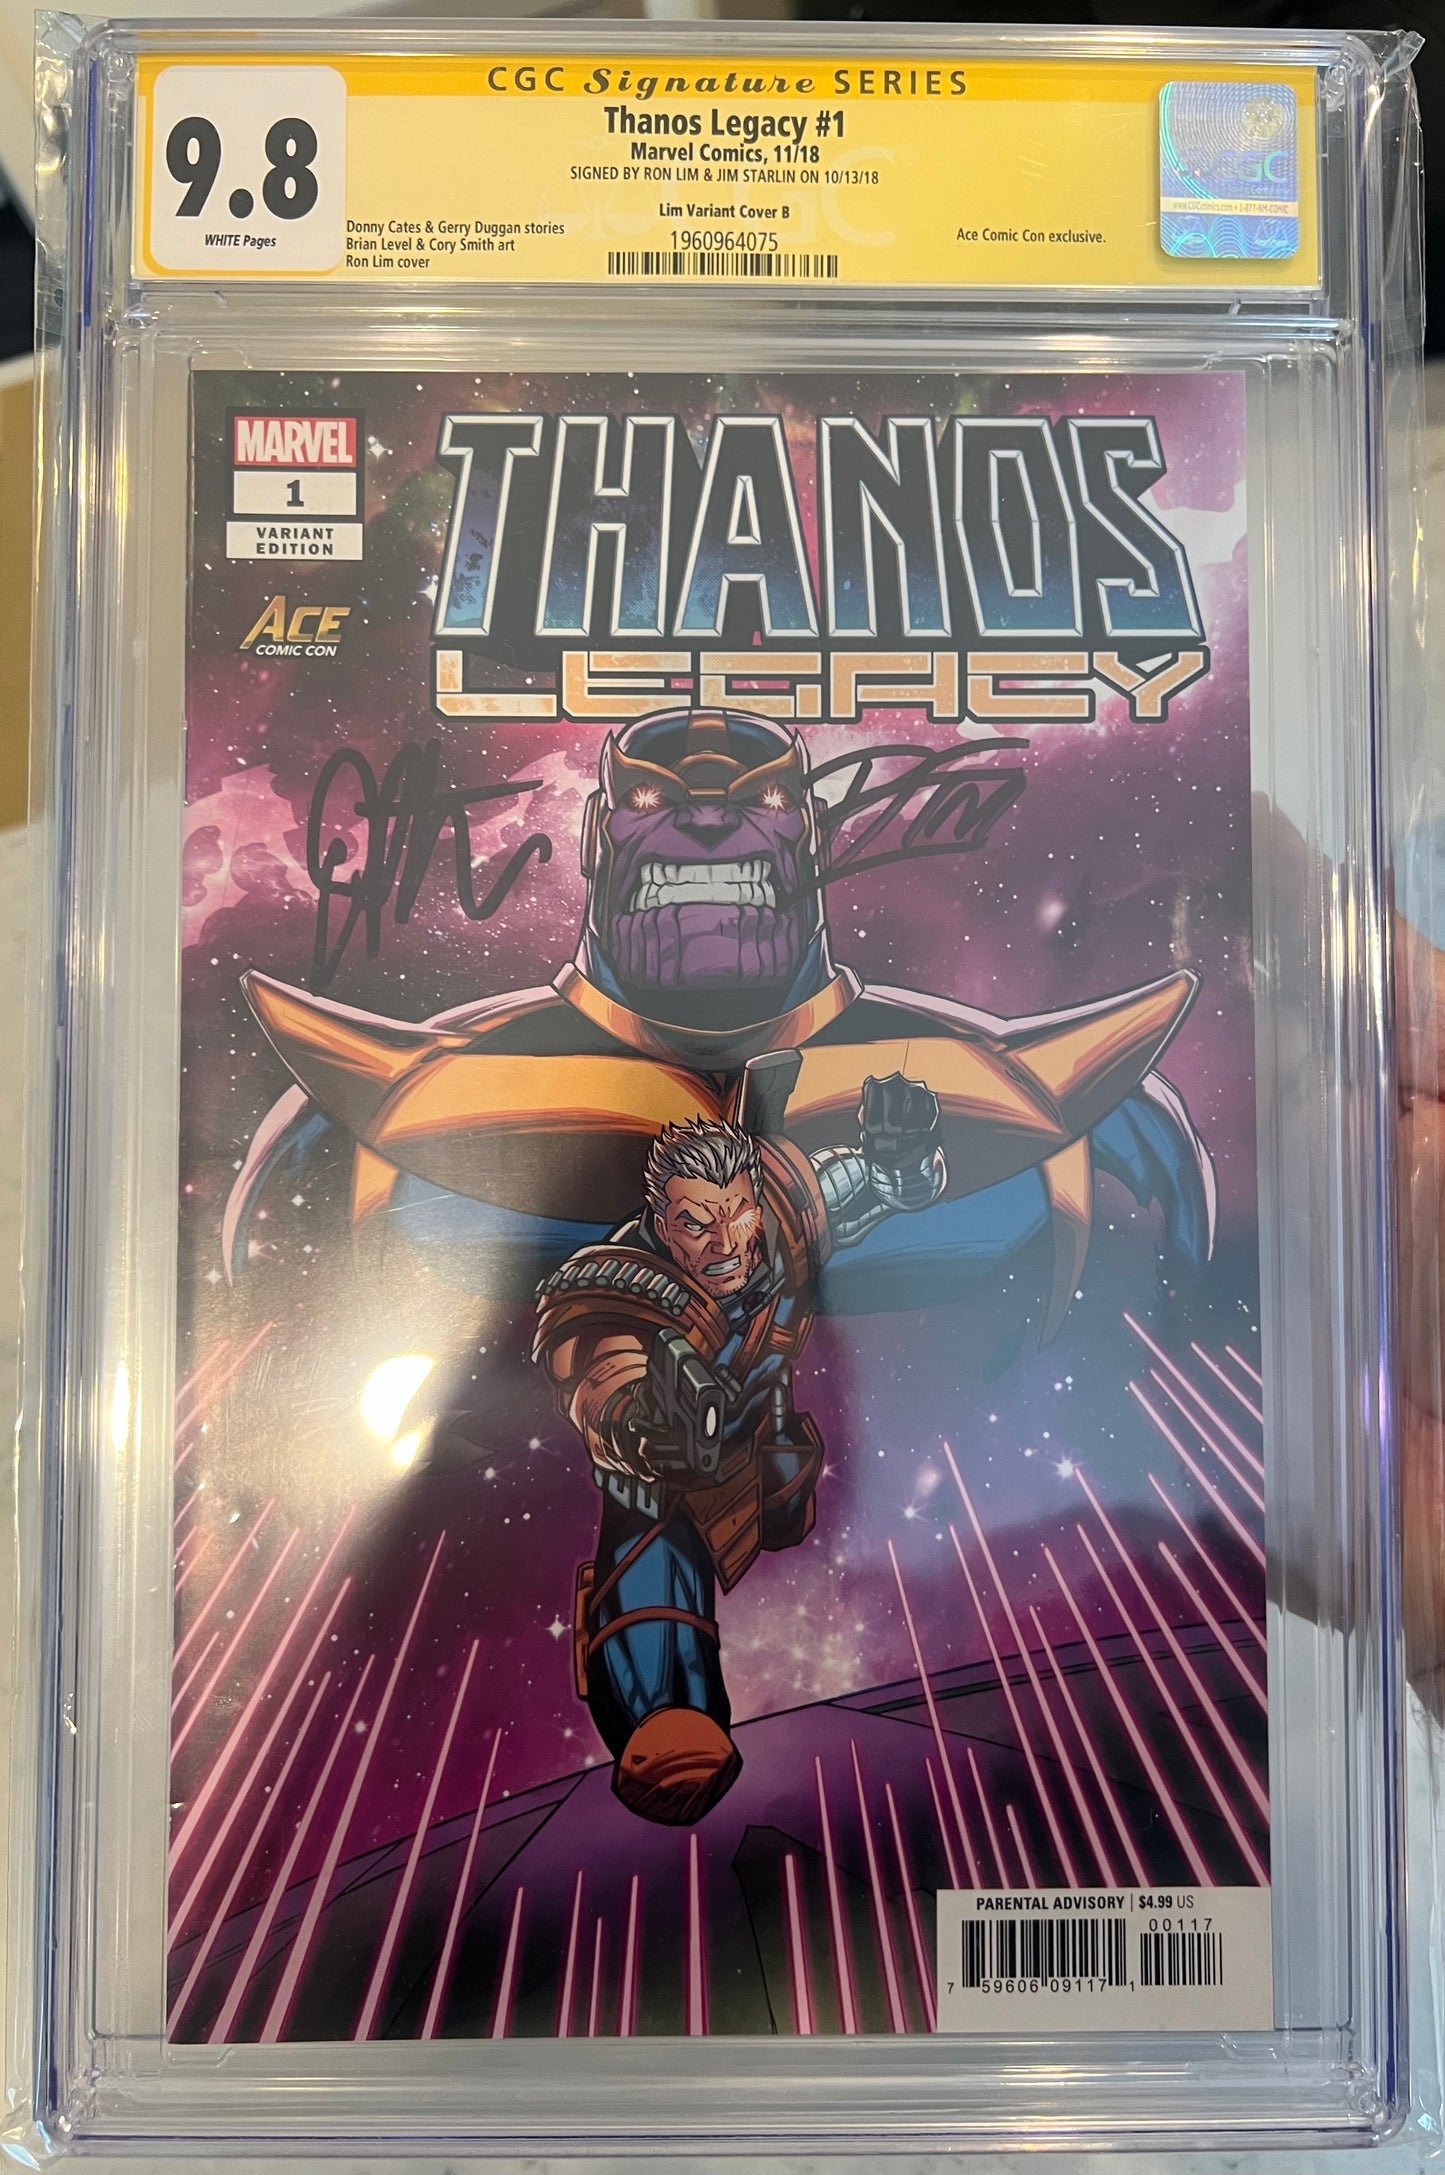 Thanos Legacy #1 CGC SS (Lim Variant Cover) signed by Ron Lim & Jim Starlin